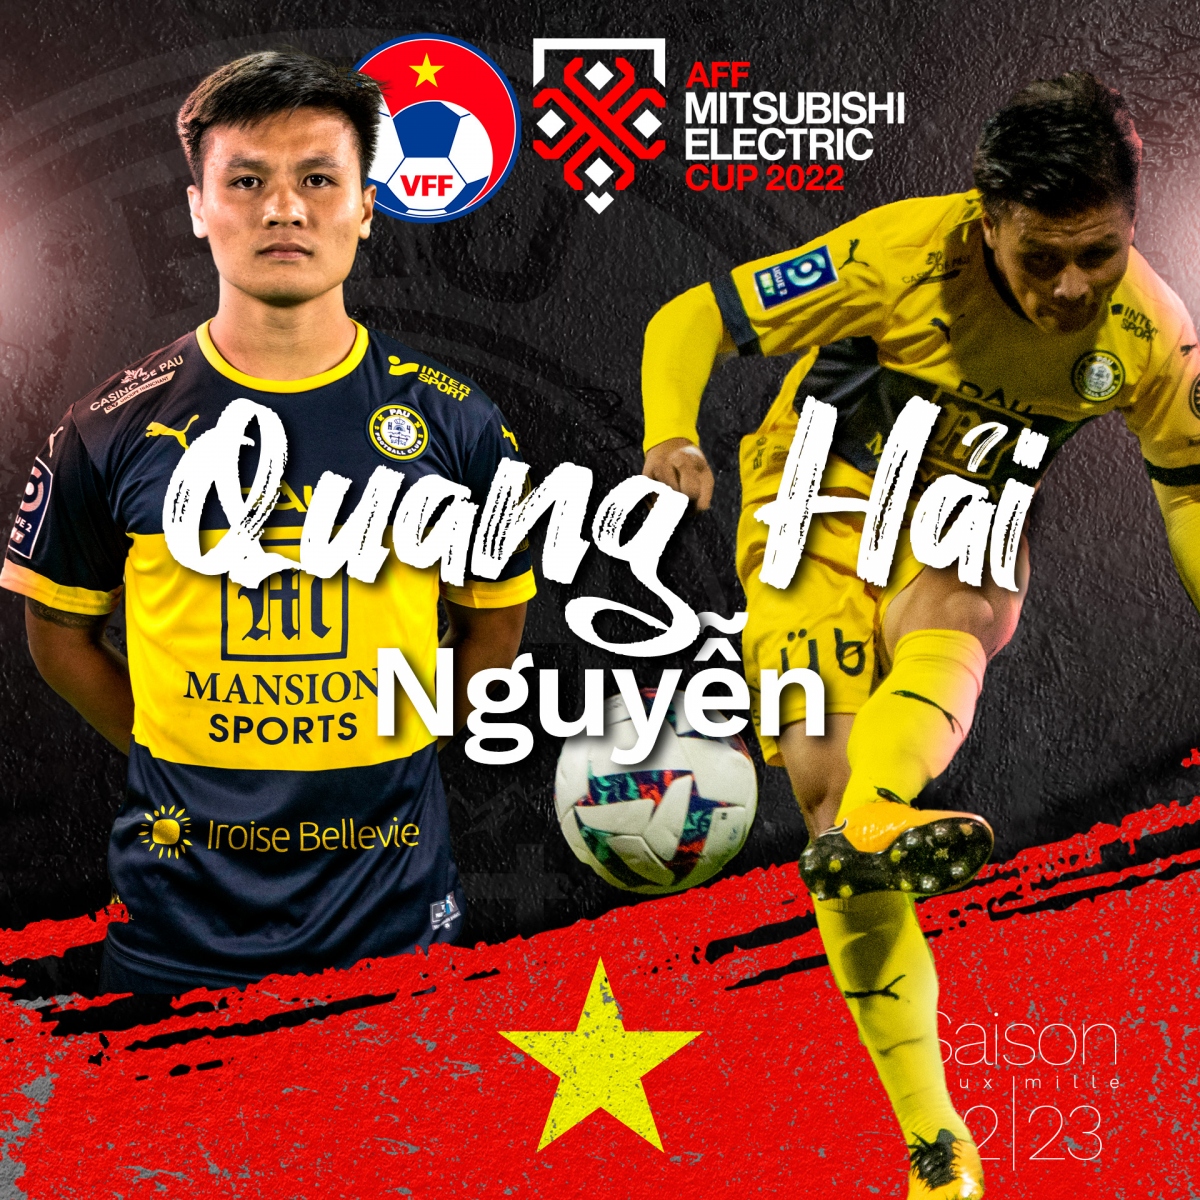 quang hai chInh thUc duoc ve du aff cup 2022 hinh anh 1